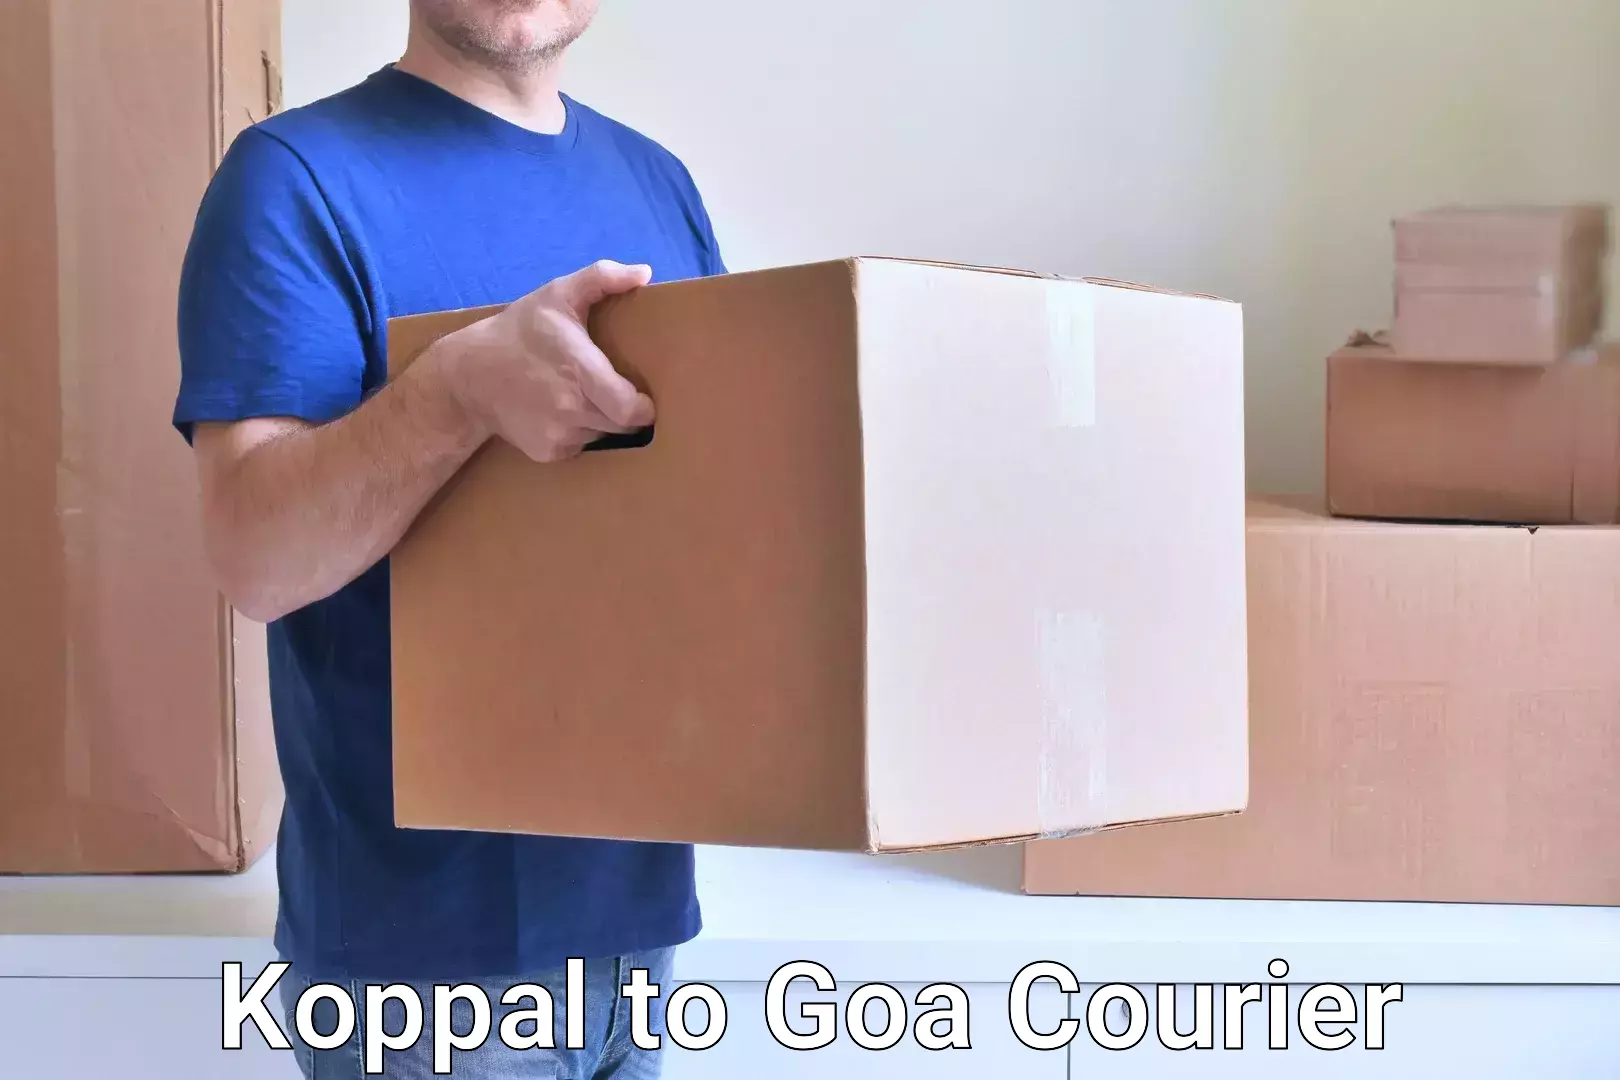 User-friendly delivery service Koppal to Goa